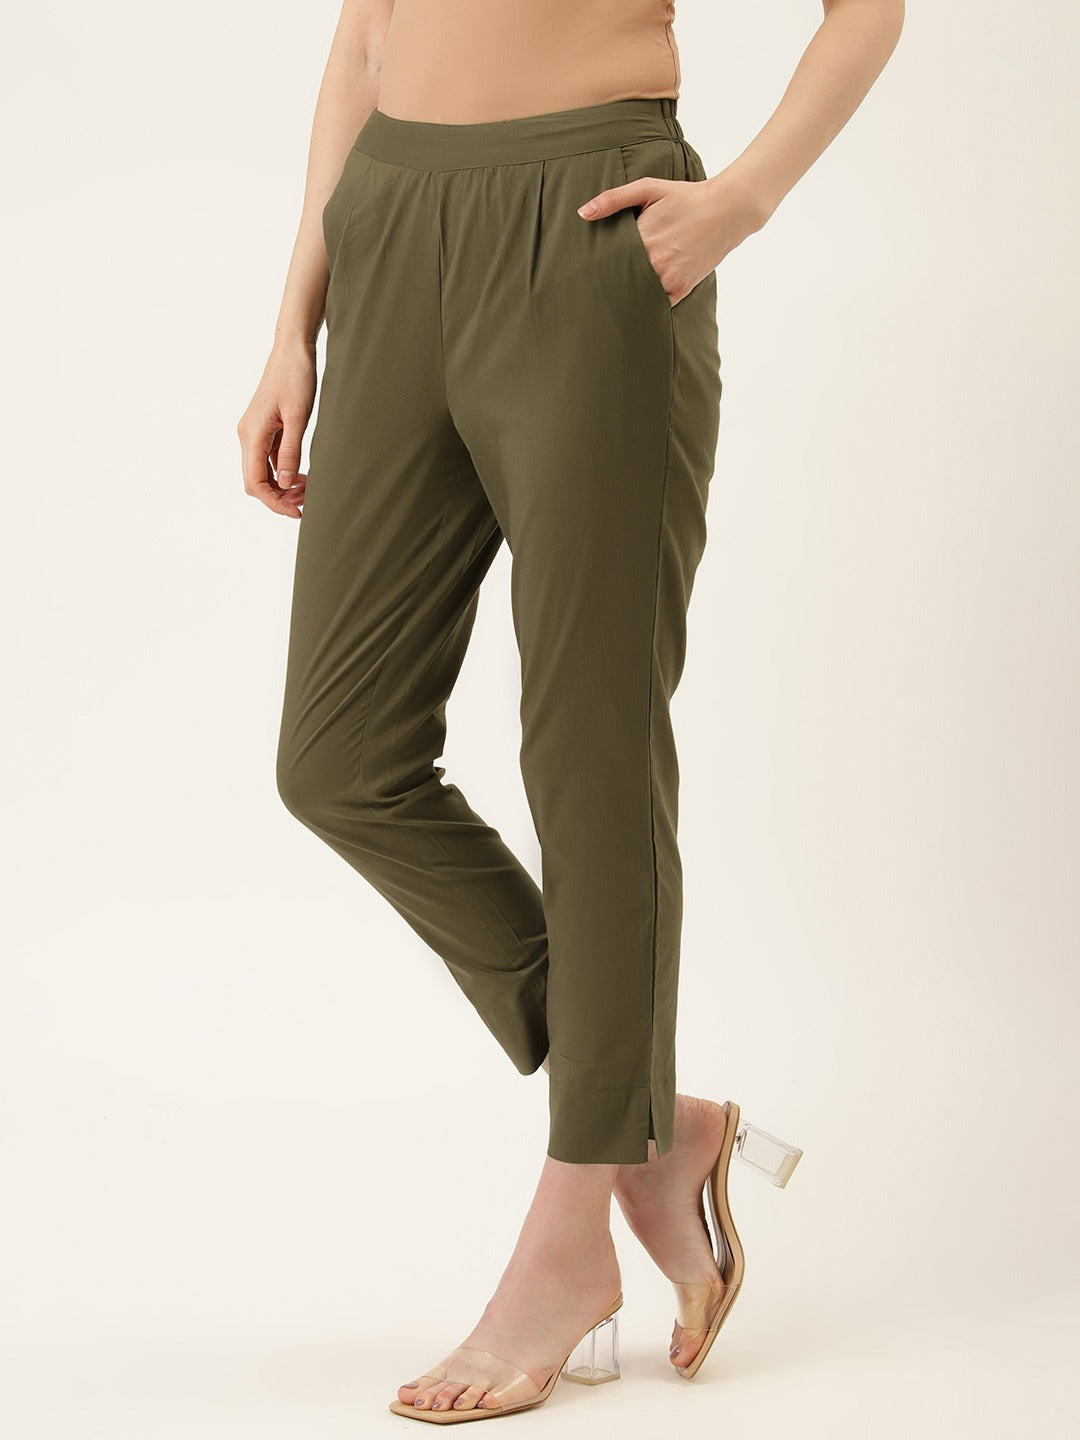 Olive Green Ethnic Wear Cotton Pants